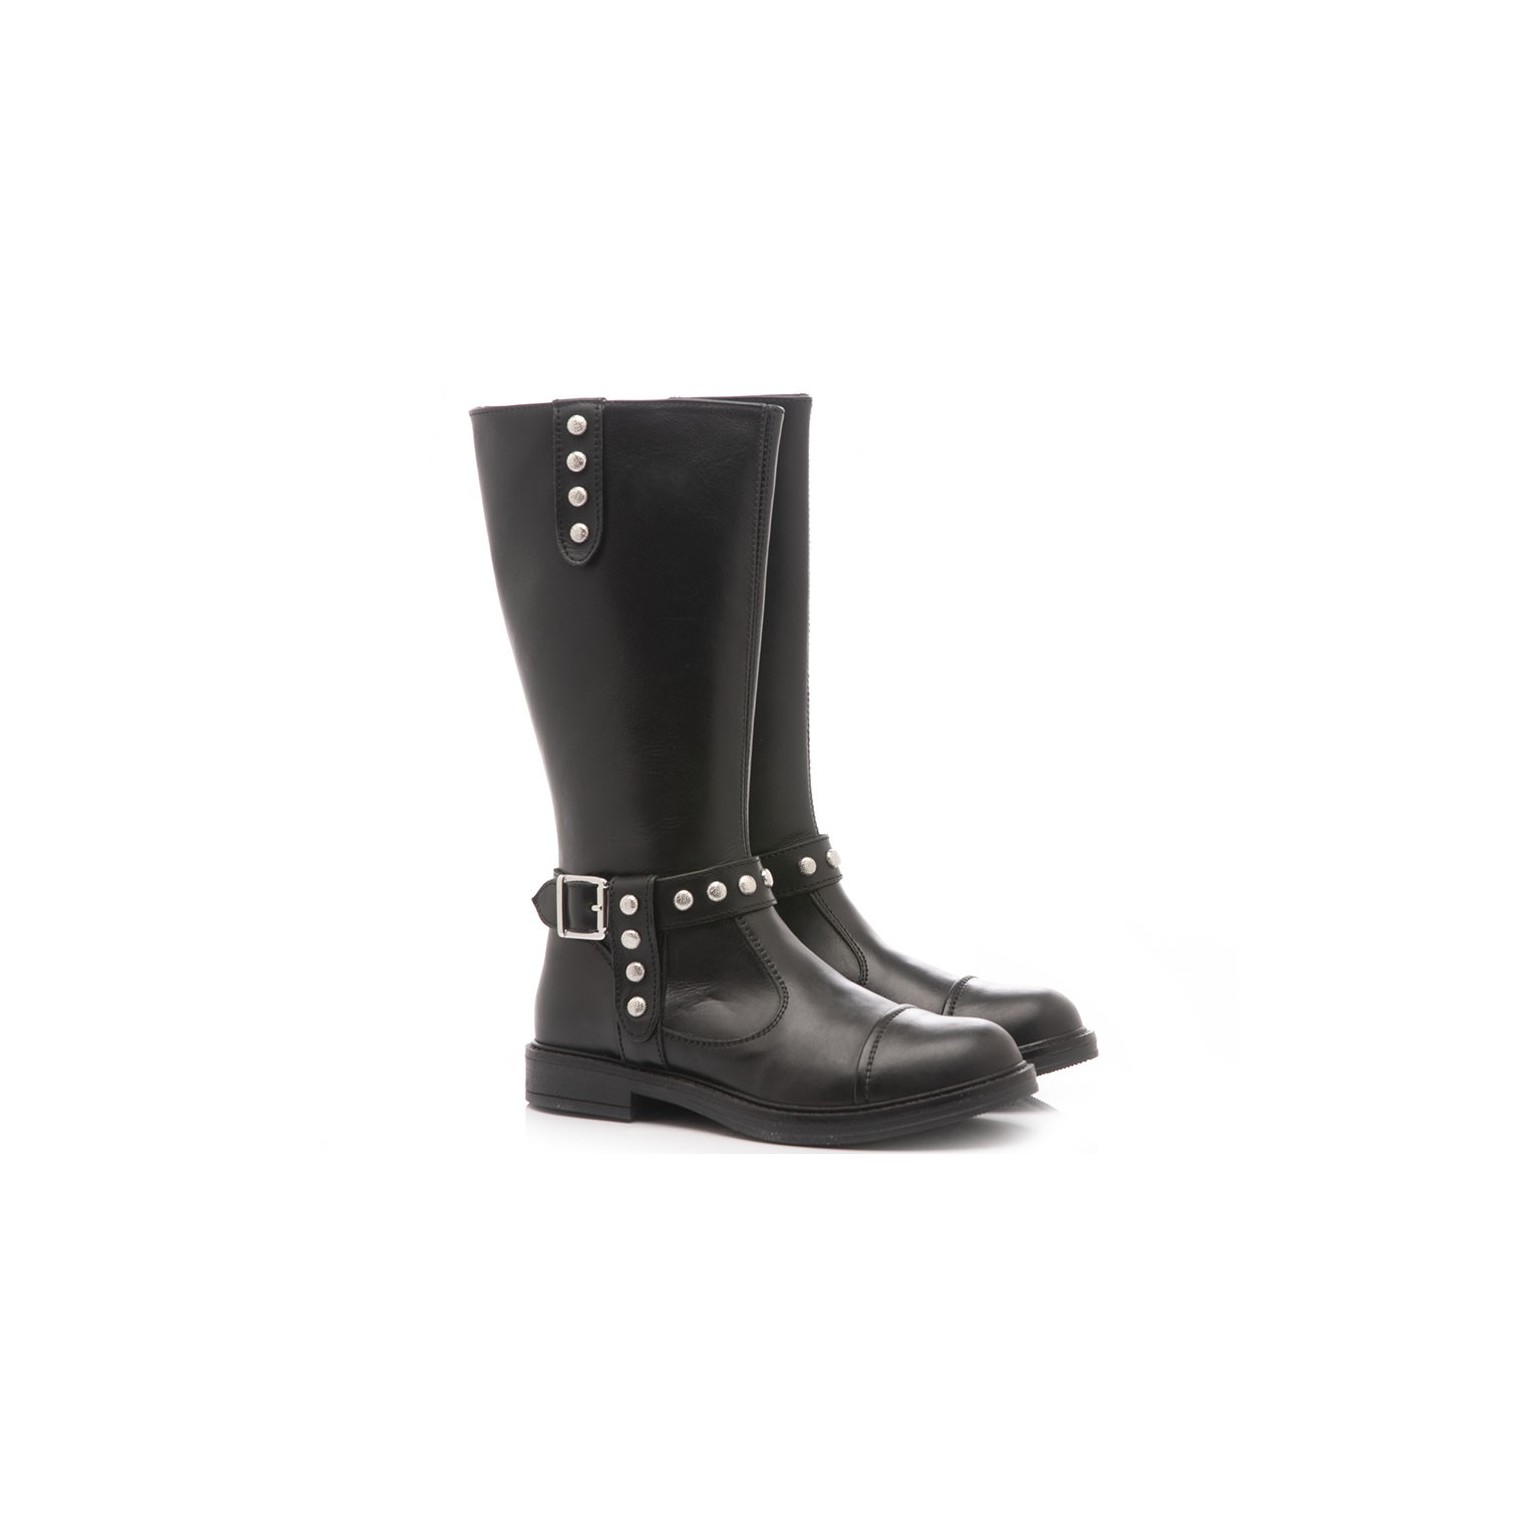 Ciao Children's Boots Leather Black 7773